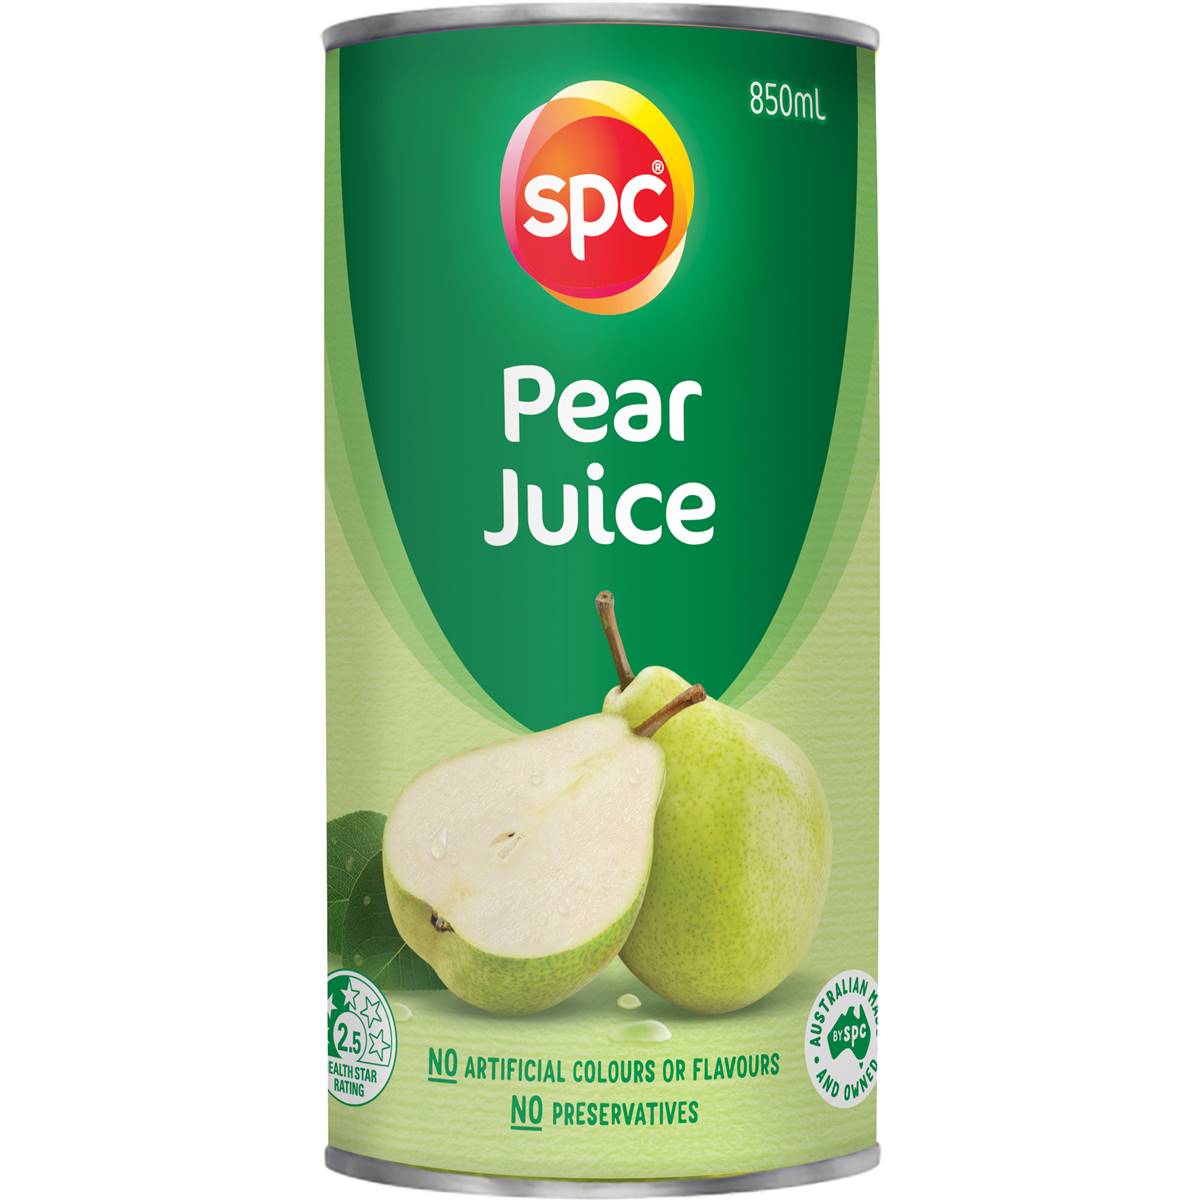 Calories in Spc Pear Juice Can